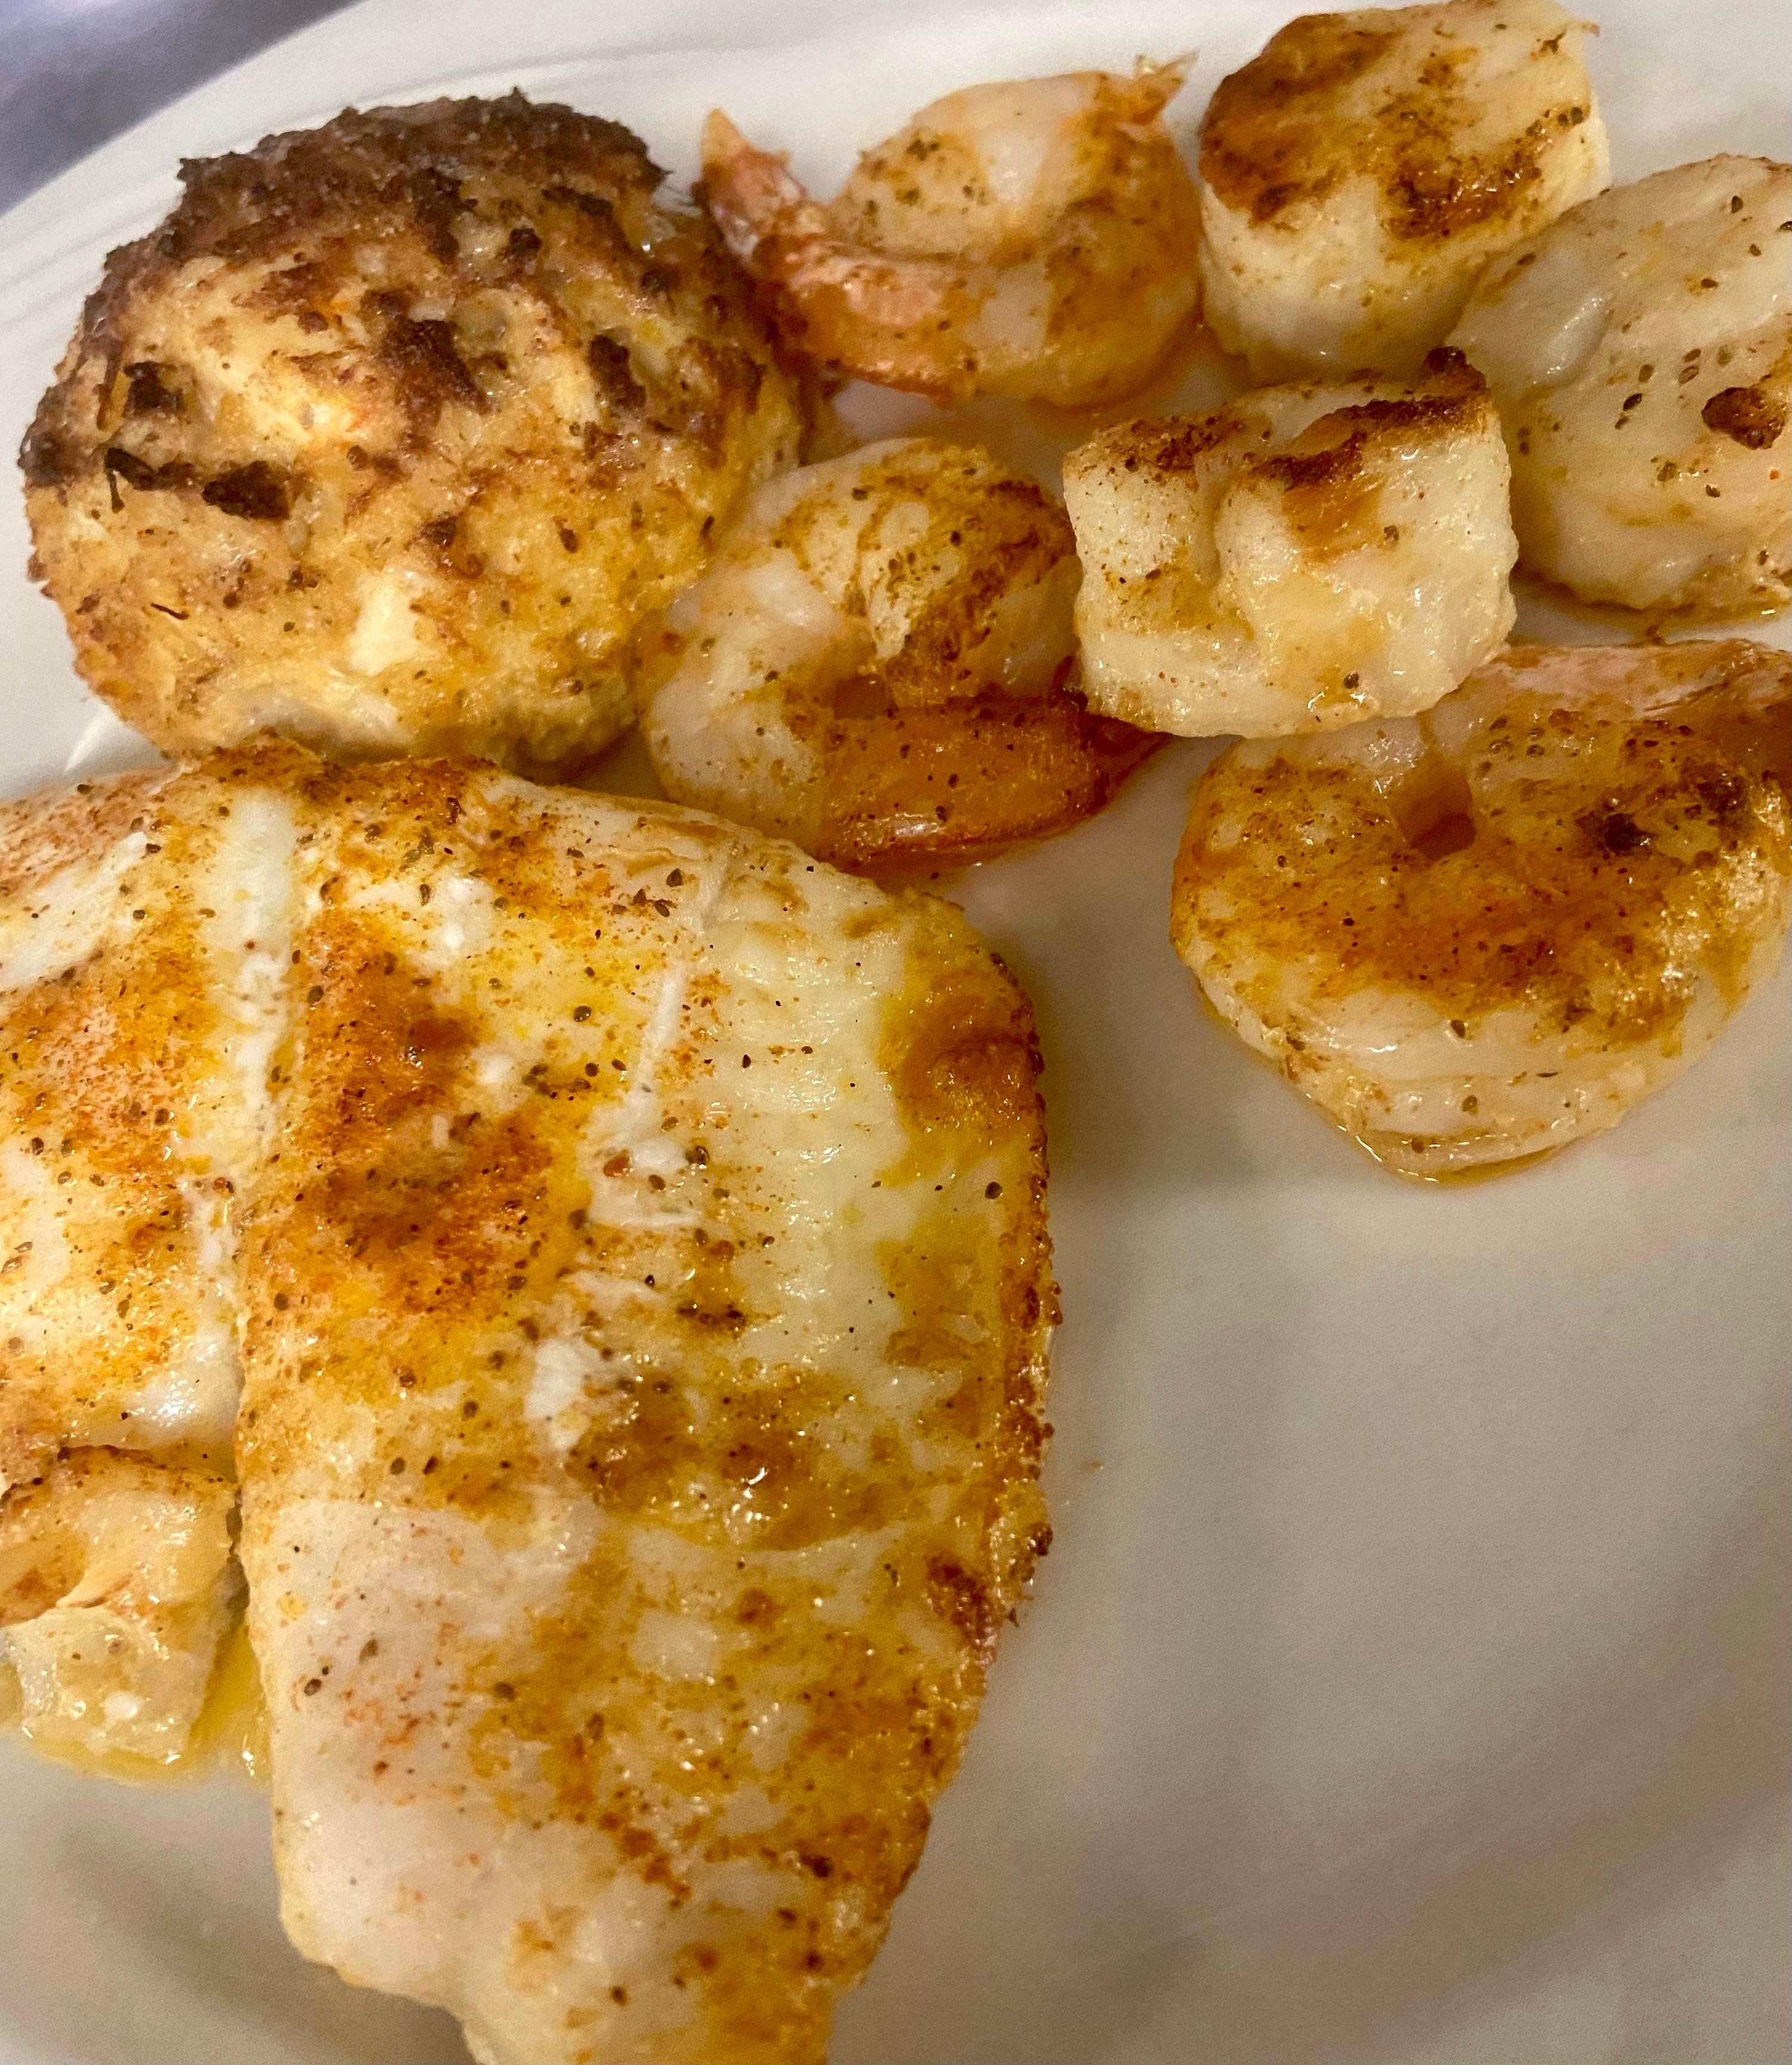 *Broil Seafood Combo